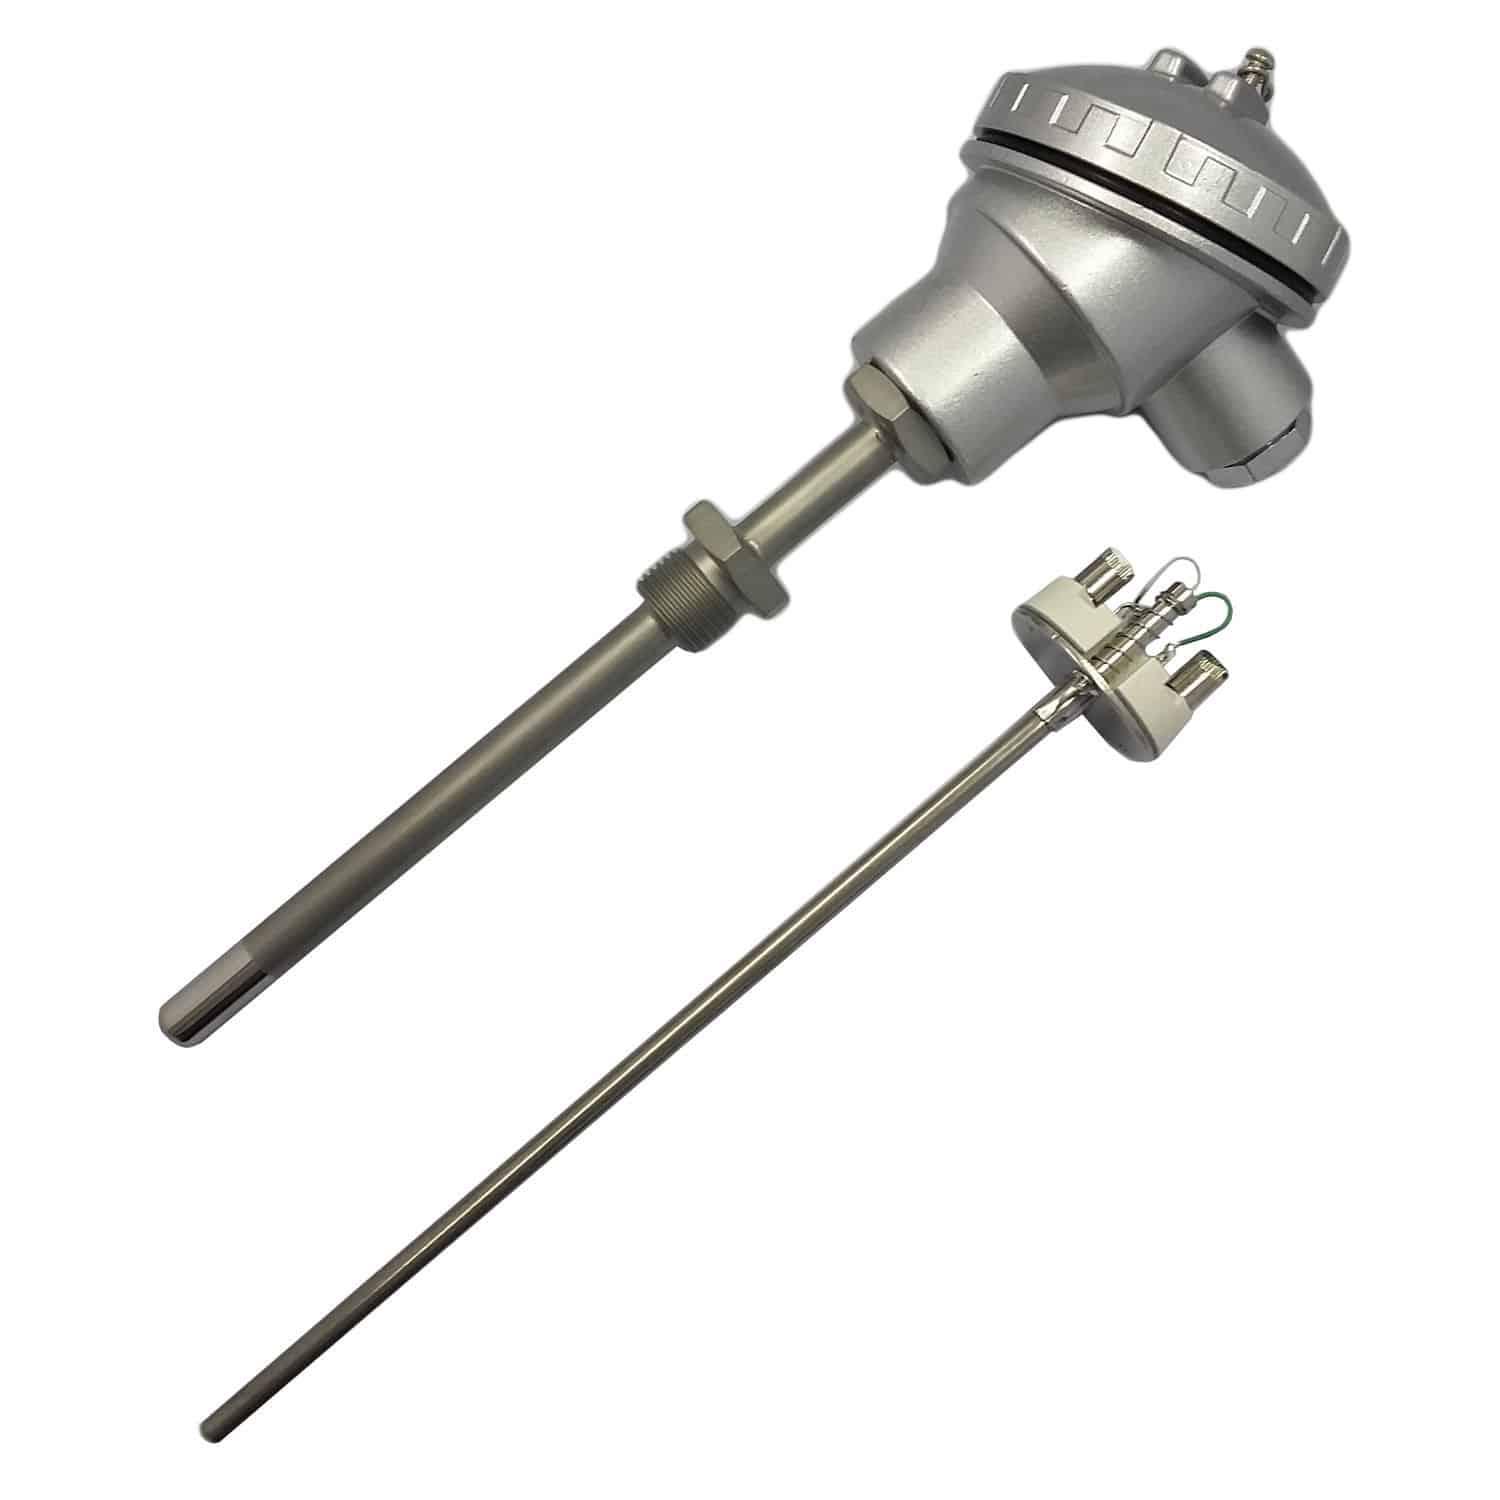 Can nhiệt Thermocouples